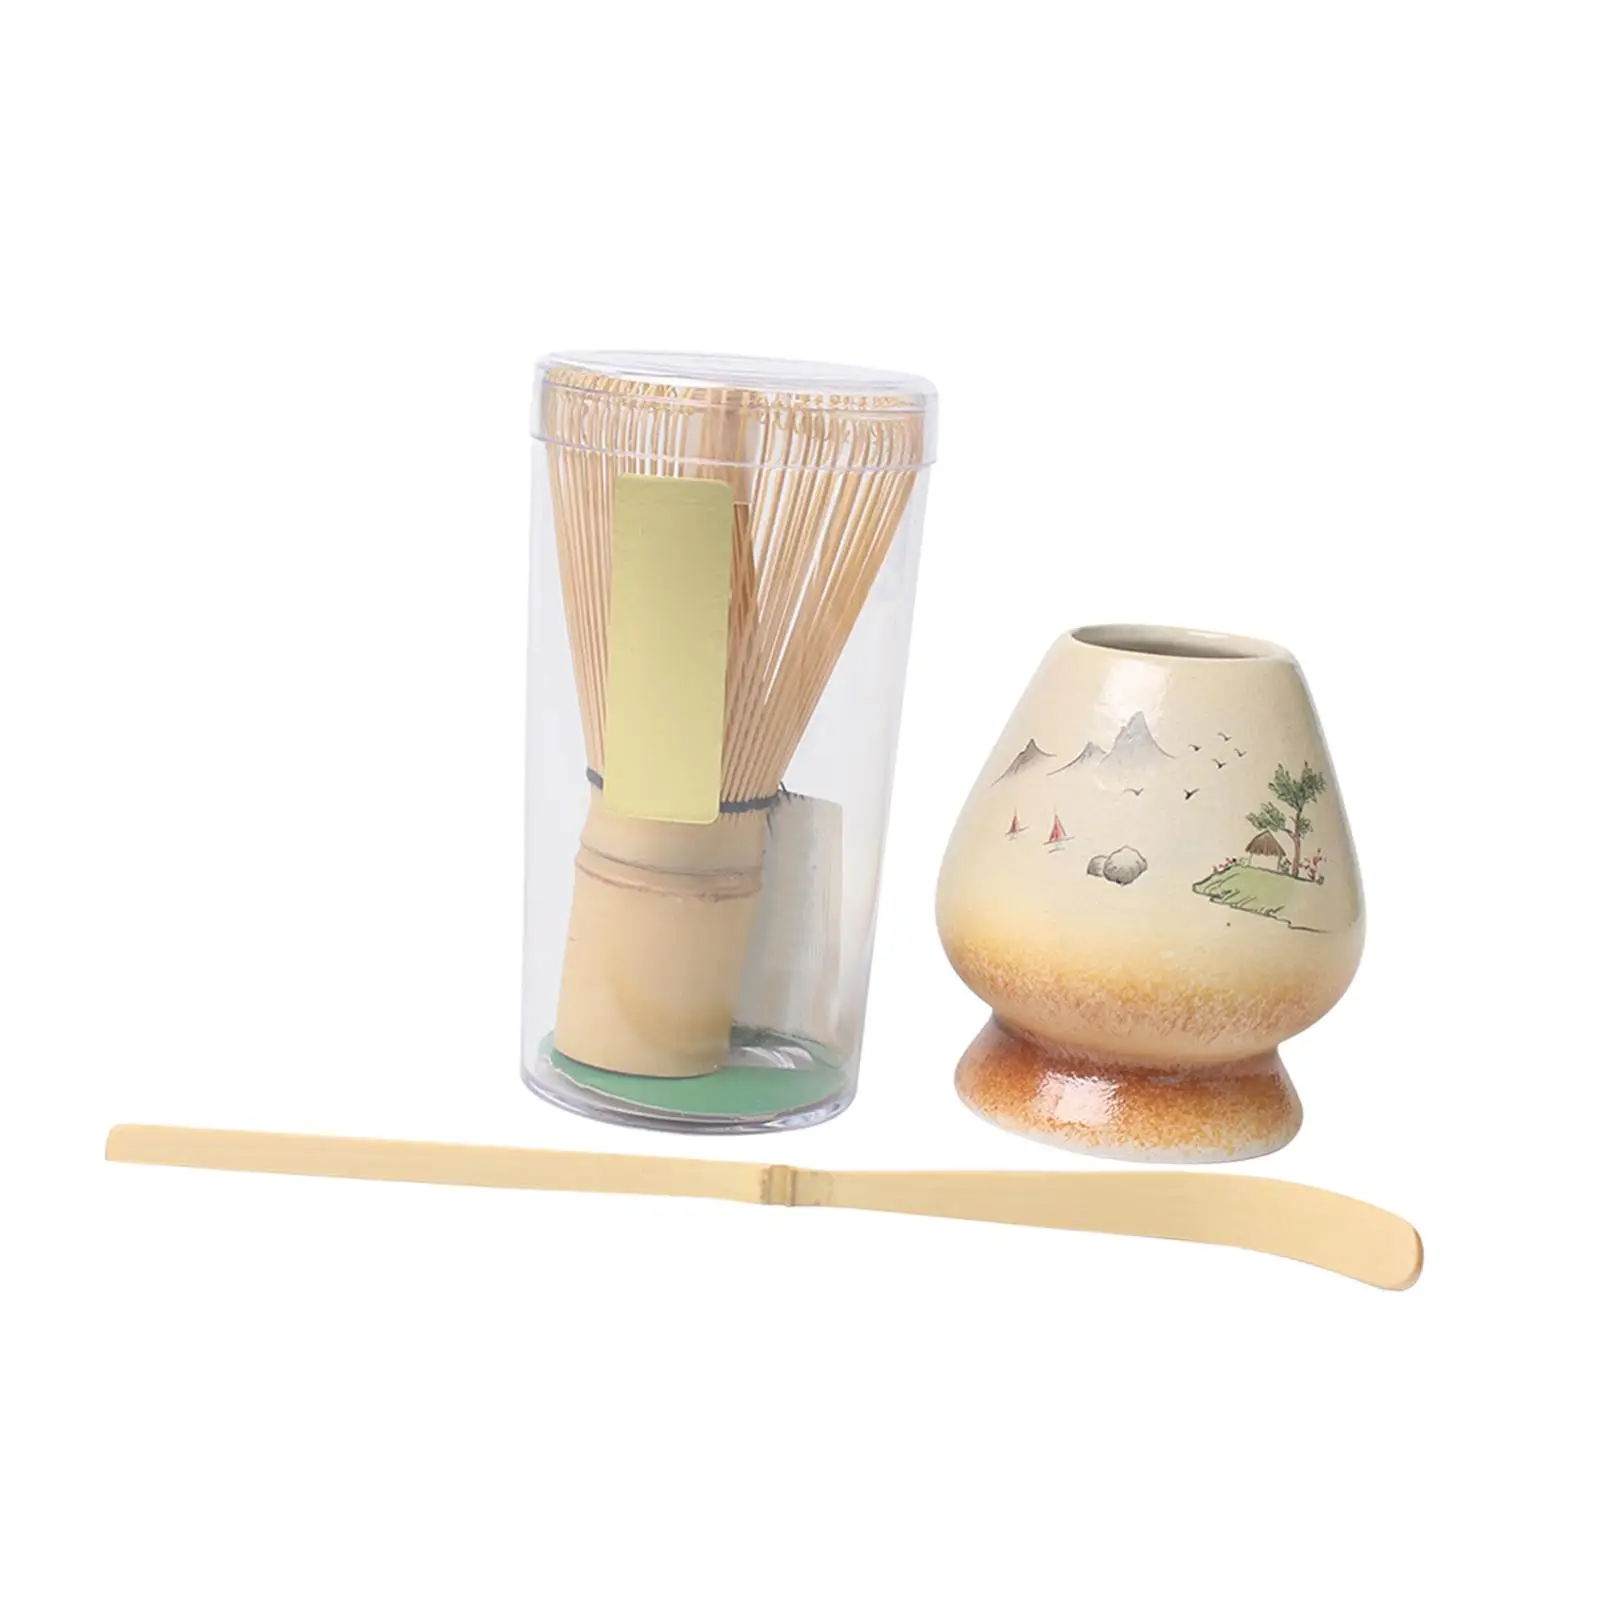 3 Pieces Traditional Japanese Matcha Whisk Set with Tea Spoon Matcha Whisk and Bowl for Japanese Matcha Preparation Beginner